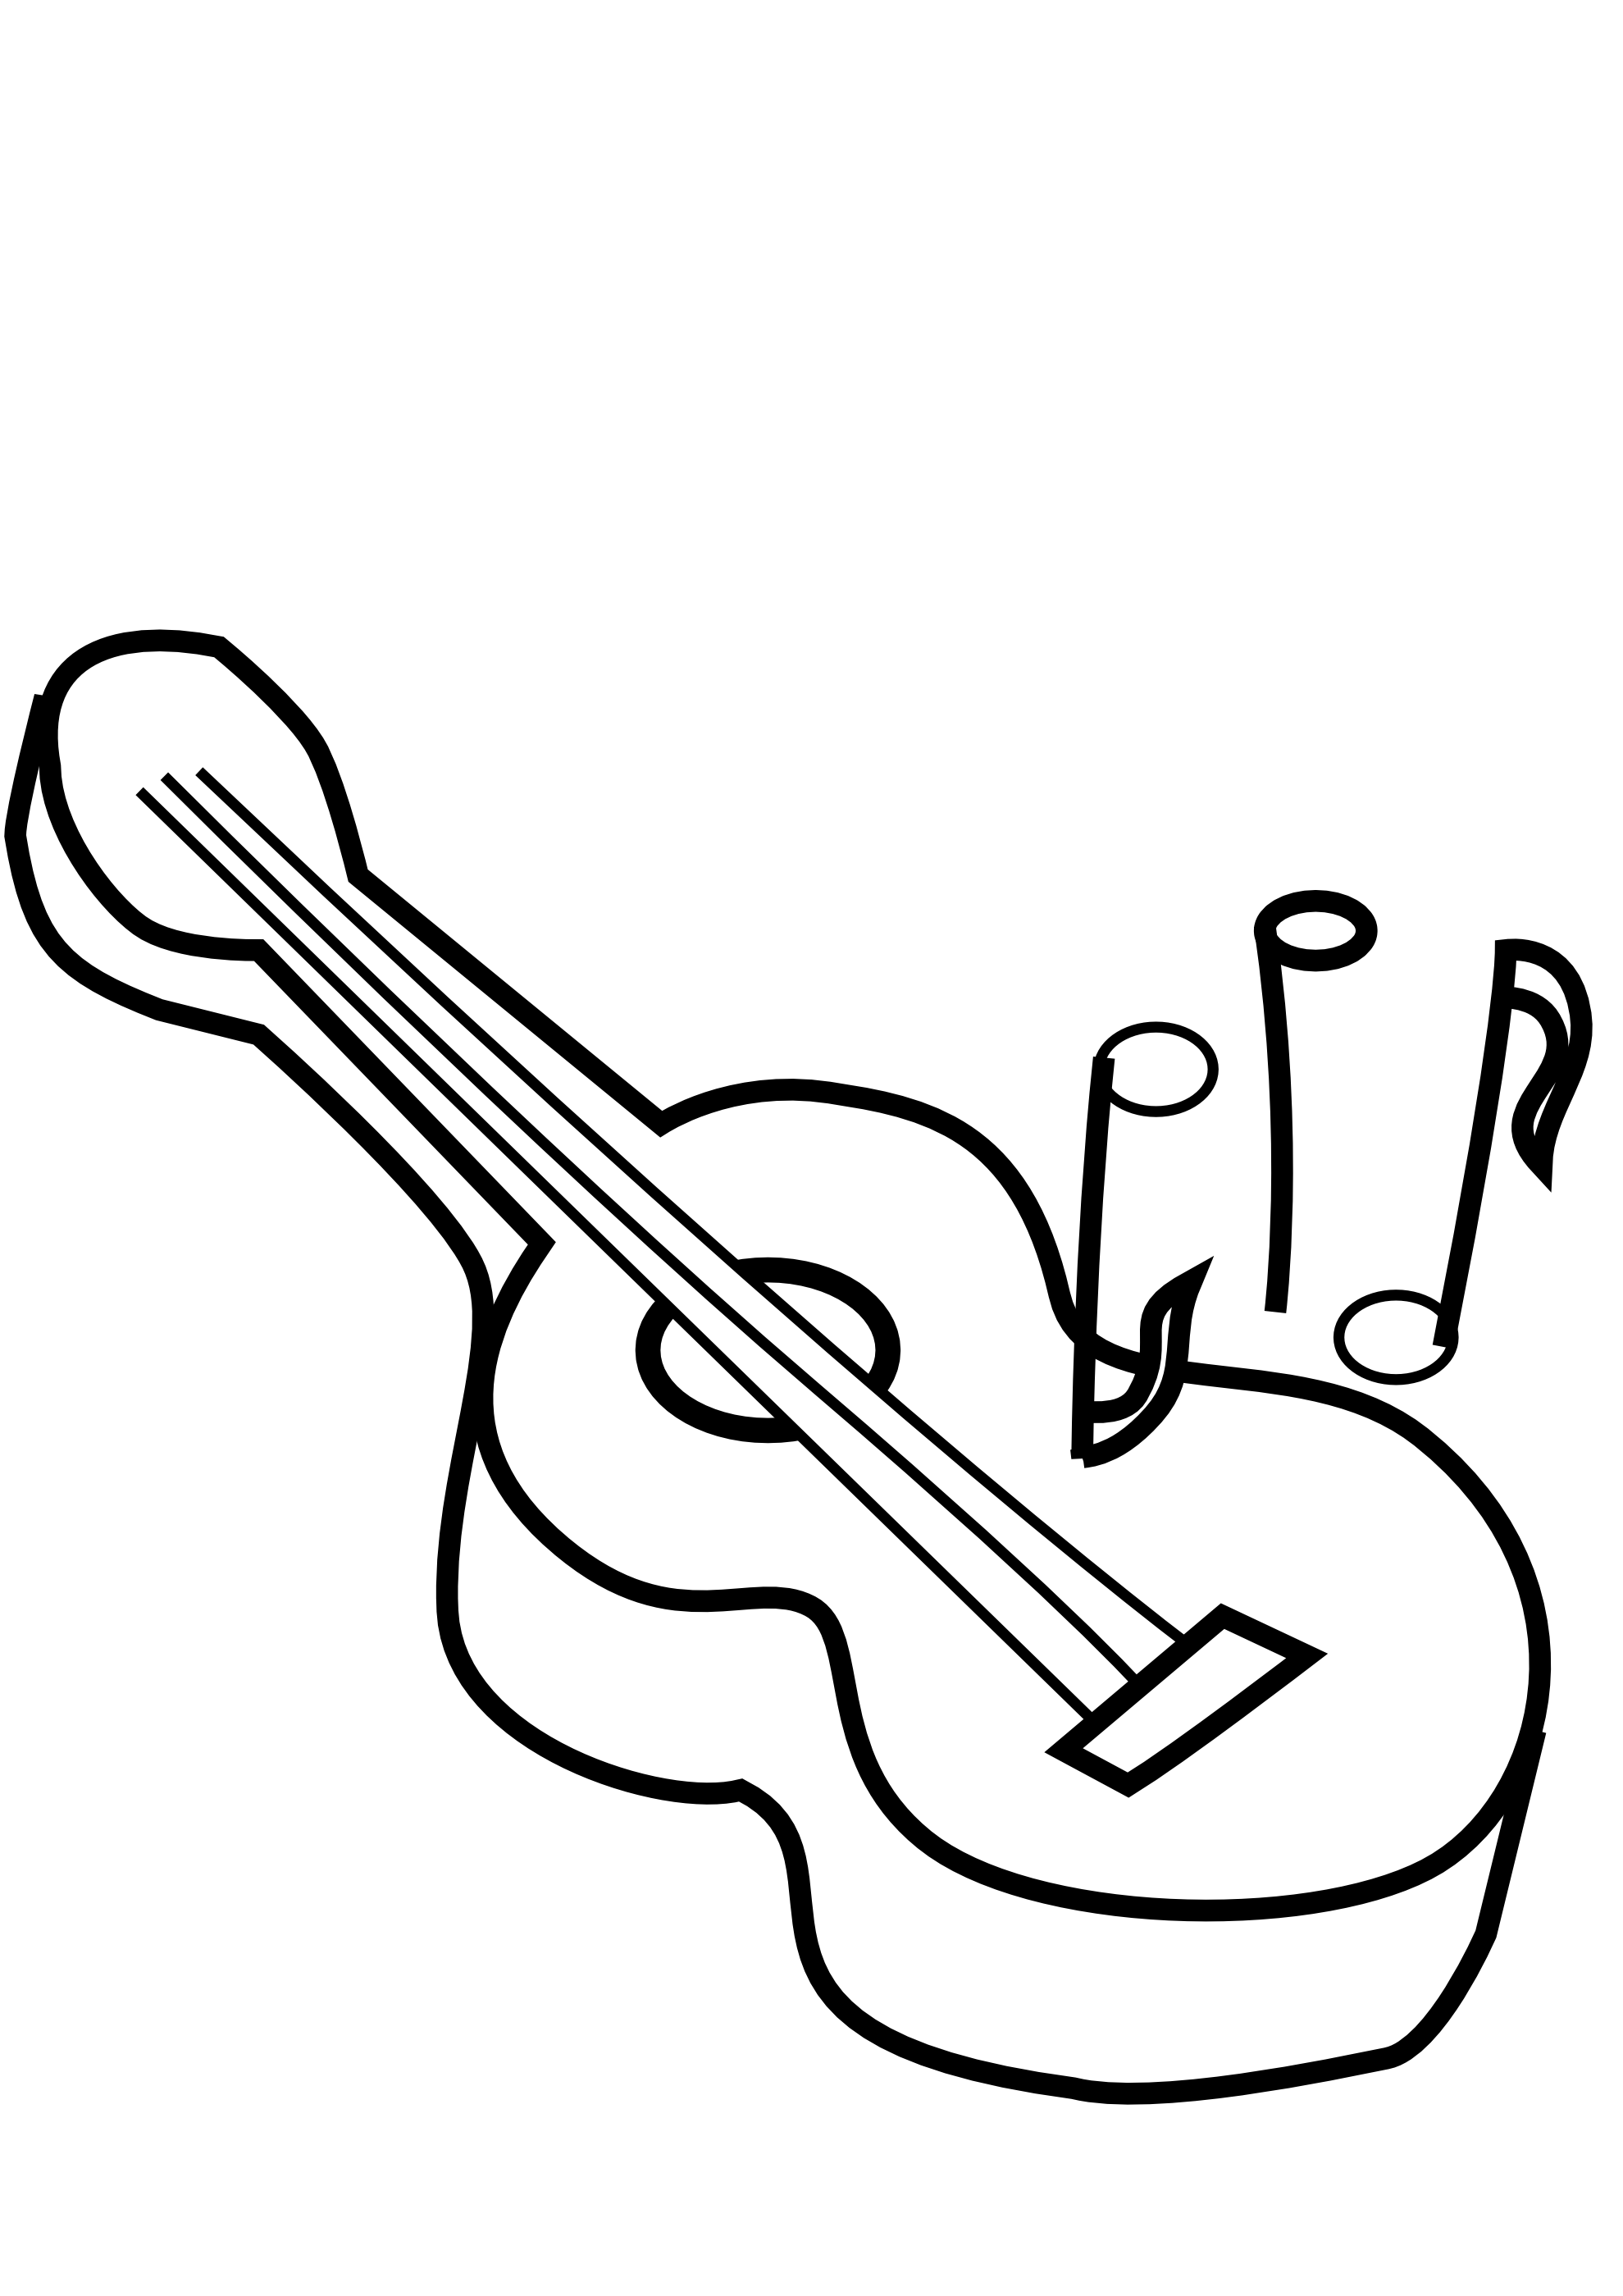 Black And White Guitar | Free Download Clip Art | Free Clip Art ...